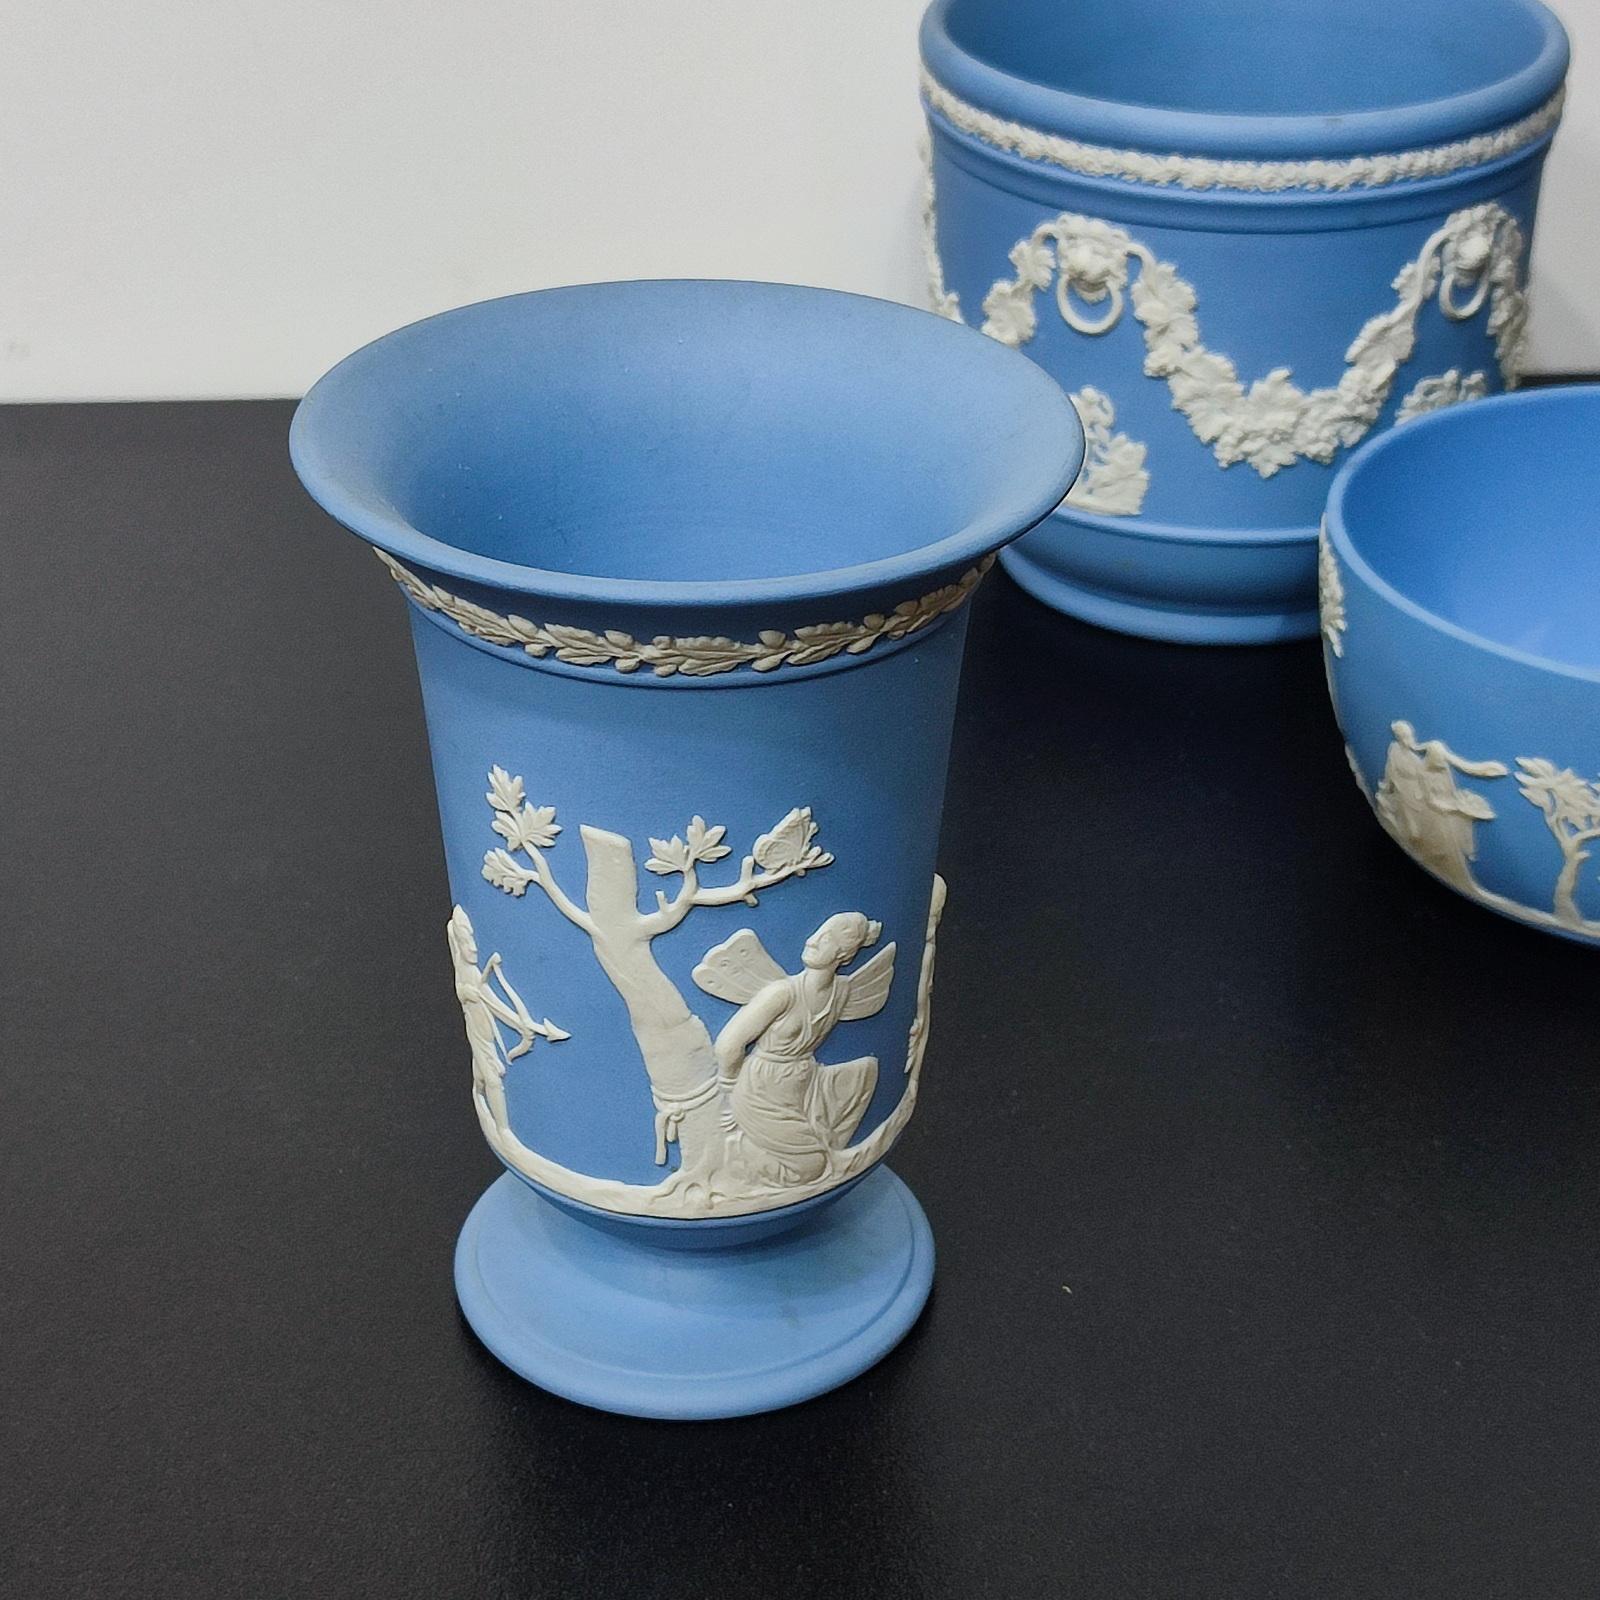 Wedgwood Blue Jasper Ware Vessels Classical Scenes, Collection of 3, FREESHIP For Sale 5